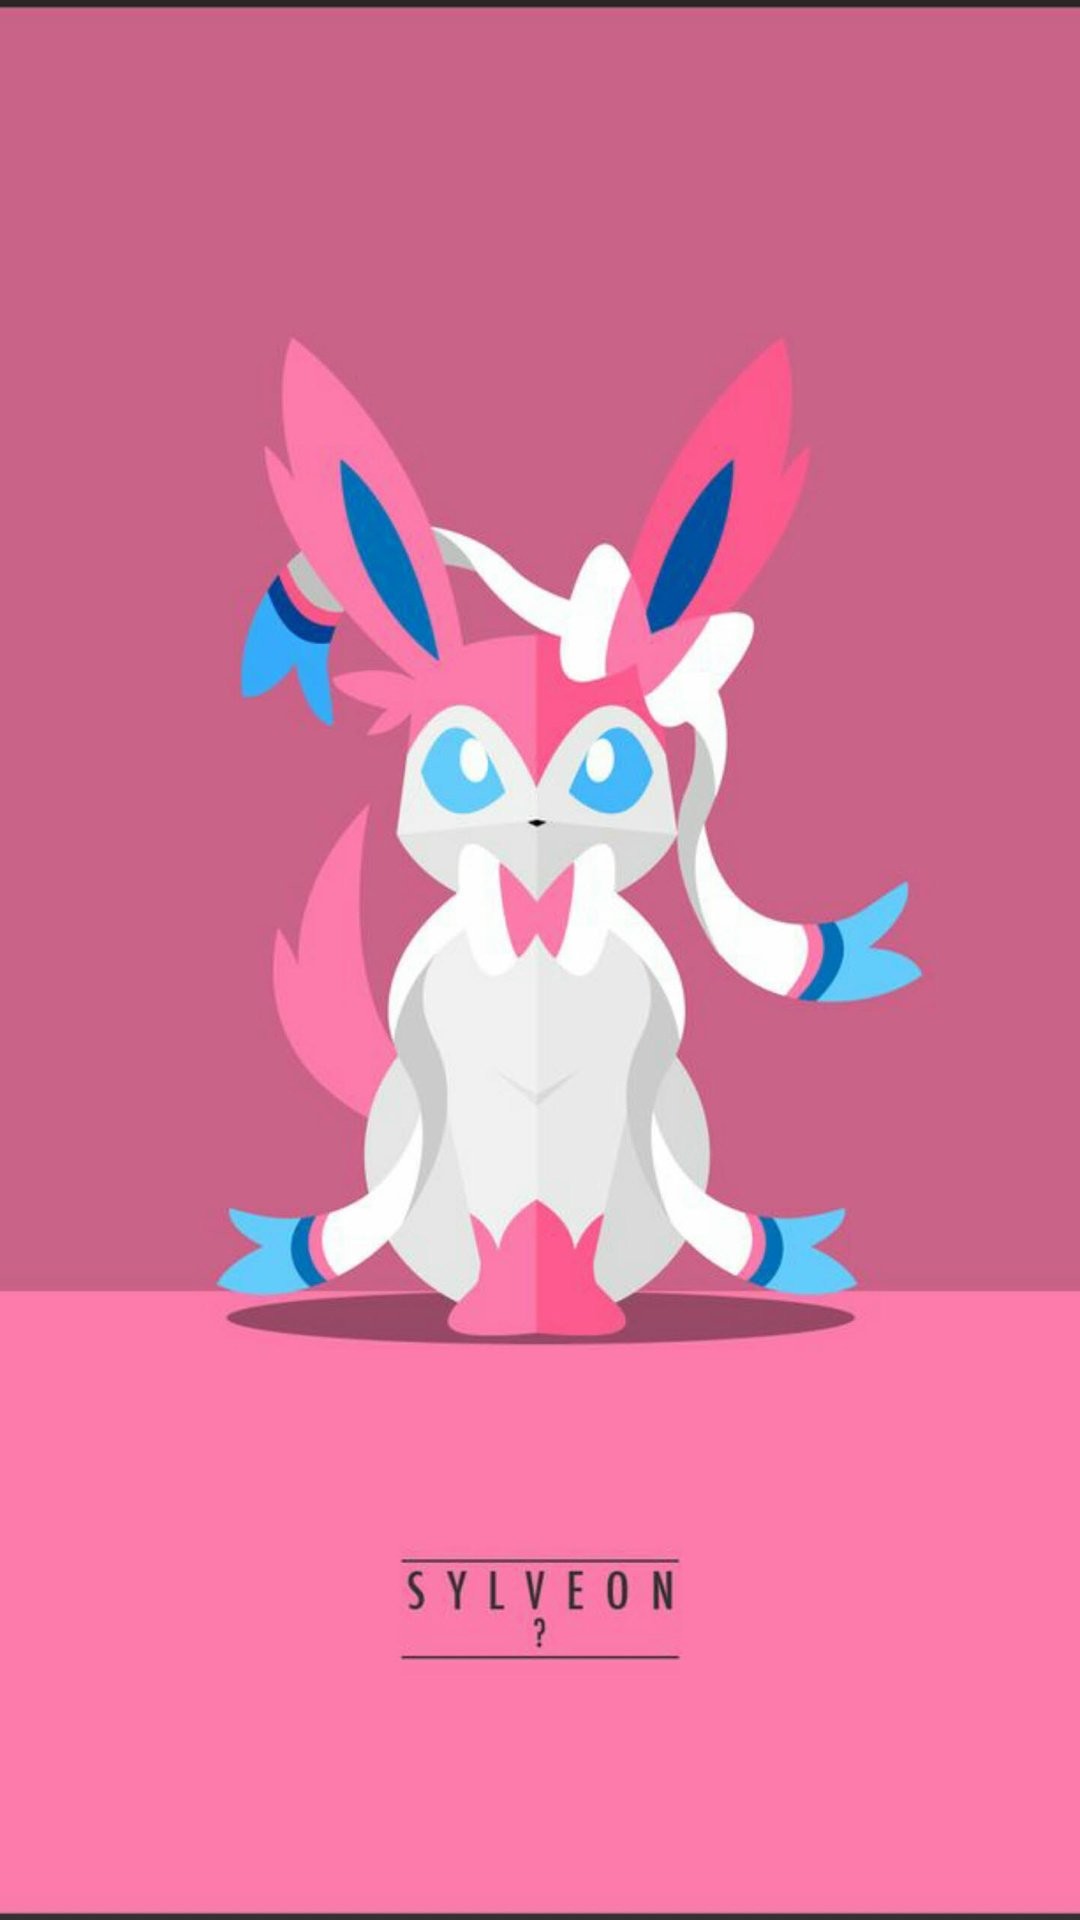 1080x1920 Alan // Team Valor on Twitter: "A couple more eeveelutions coming at your  face! #Eevee #TeamValor #Leafeon #Sylveon #Glaceon https://t.co/cMouavwxUn"